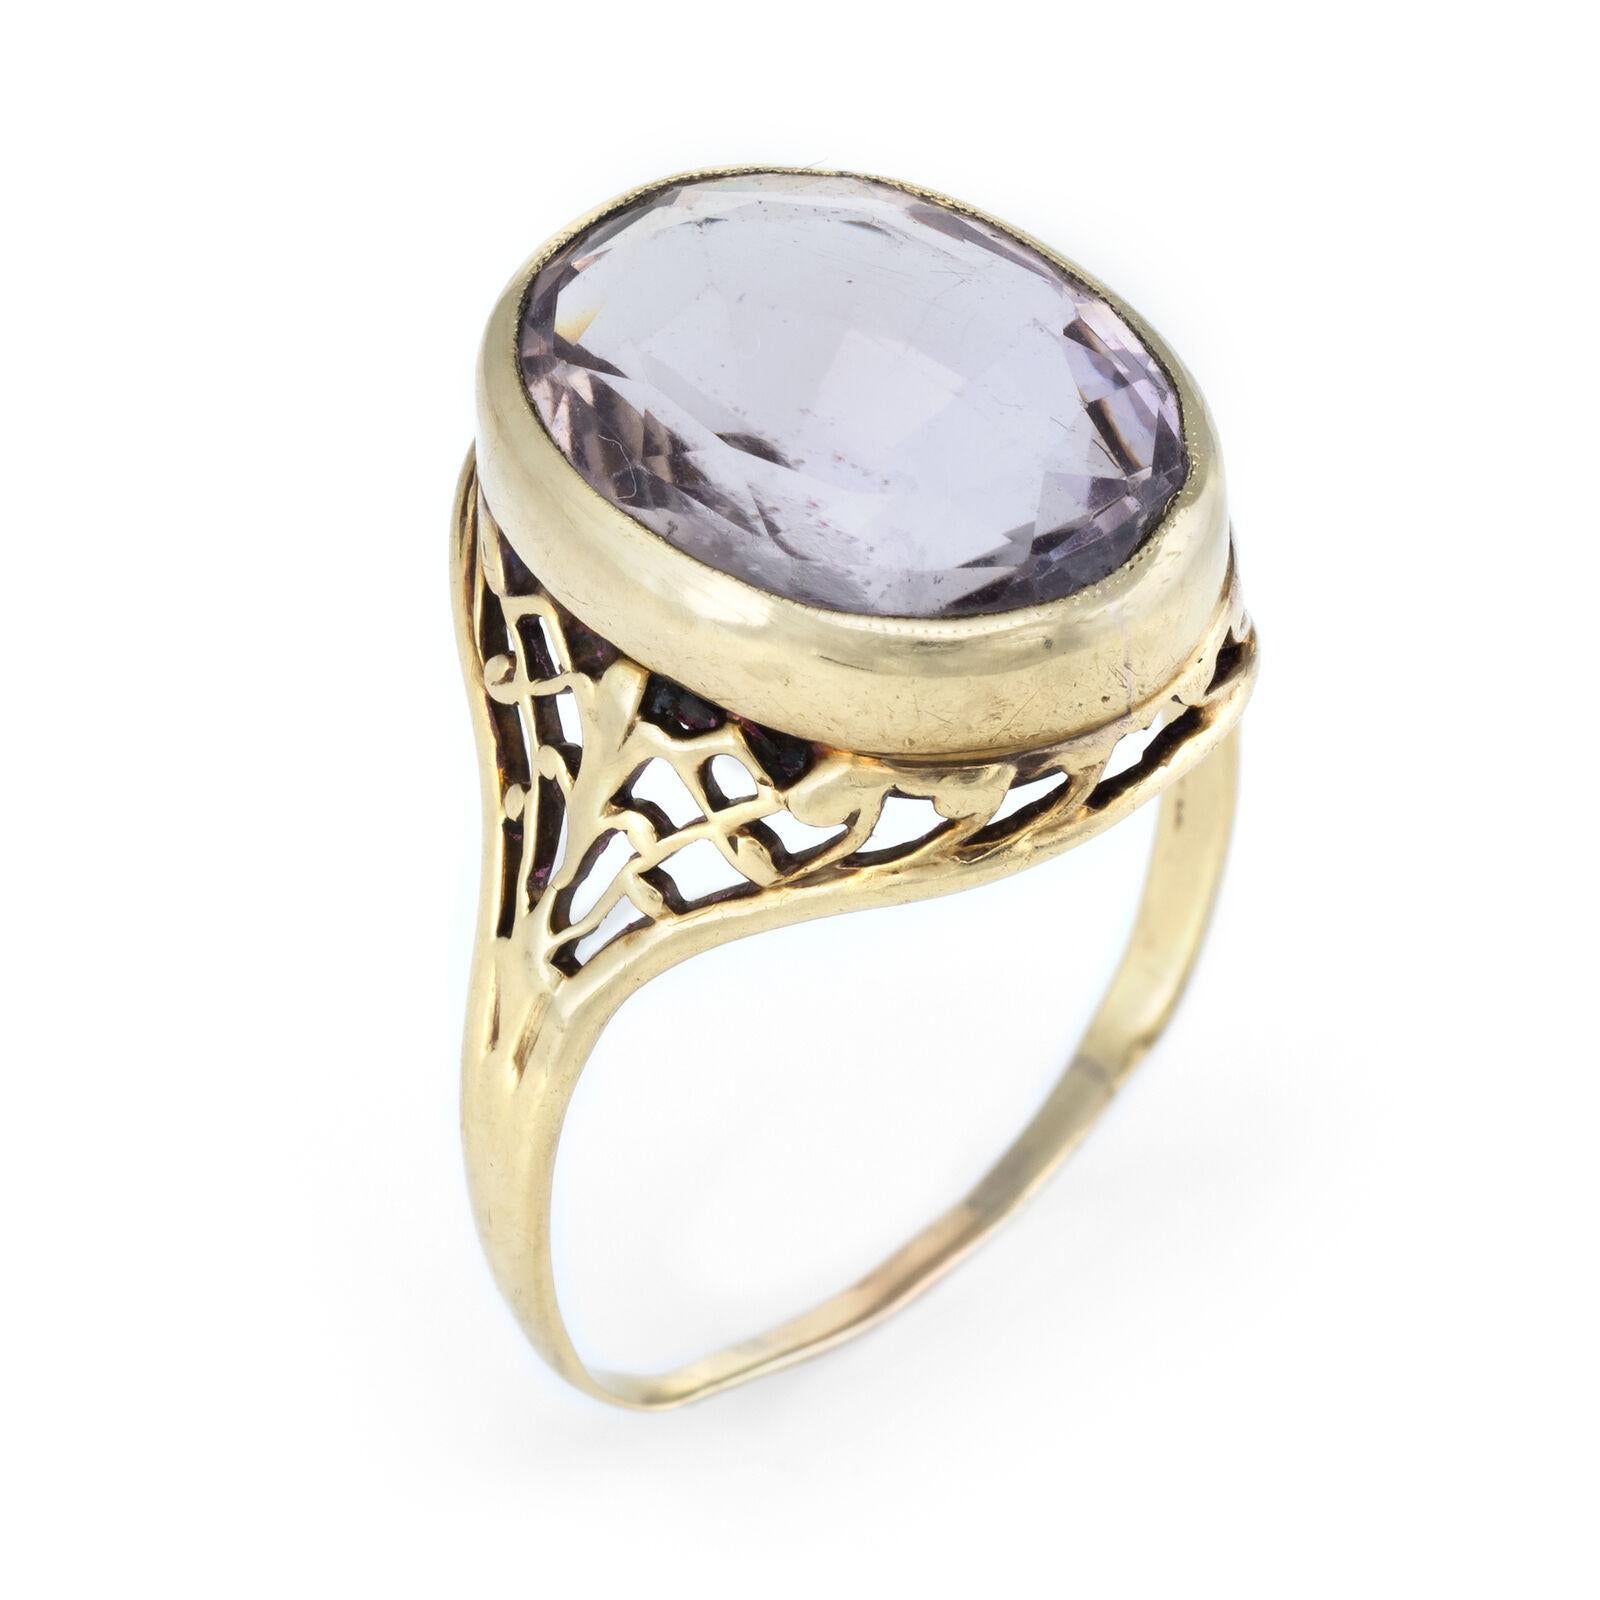 Distinct & stylish amethyst cocktail ring (circa 1950s to 1960s), crafted in 14 karat yellow gold. 

Faceted oval cut amethyst measures 14mm x 11mm (estimated at 7 carats). The amethyst is in excellent condition and free of cracks or chips. 

Bold